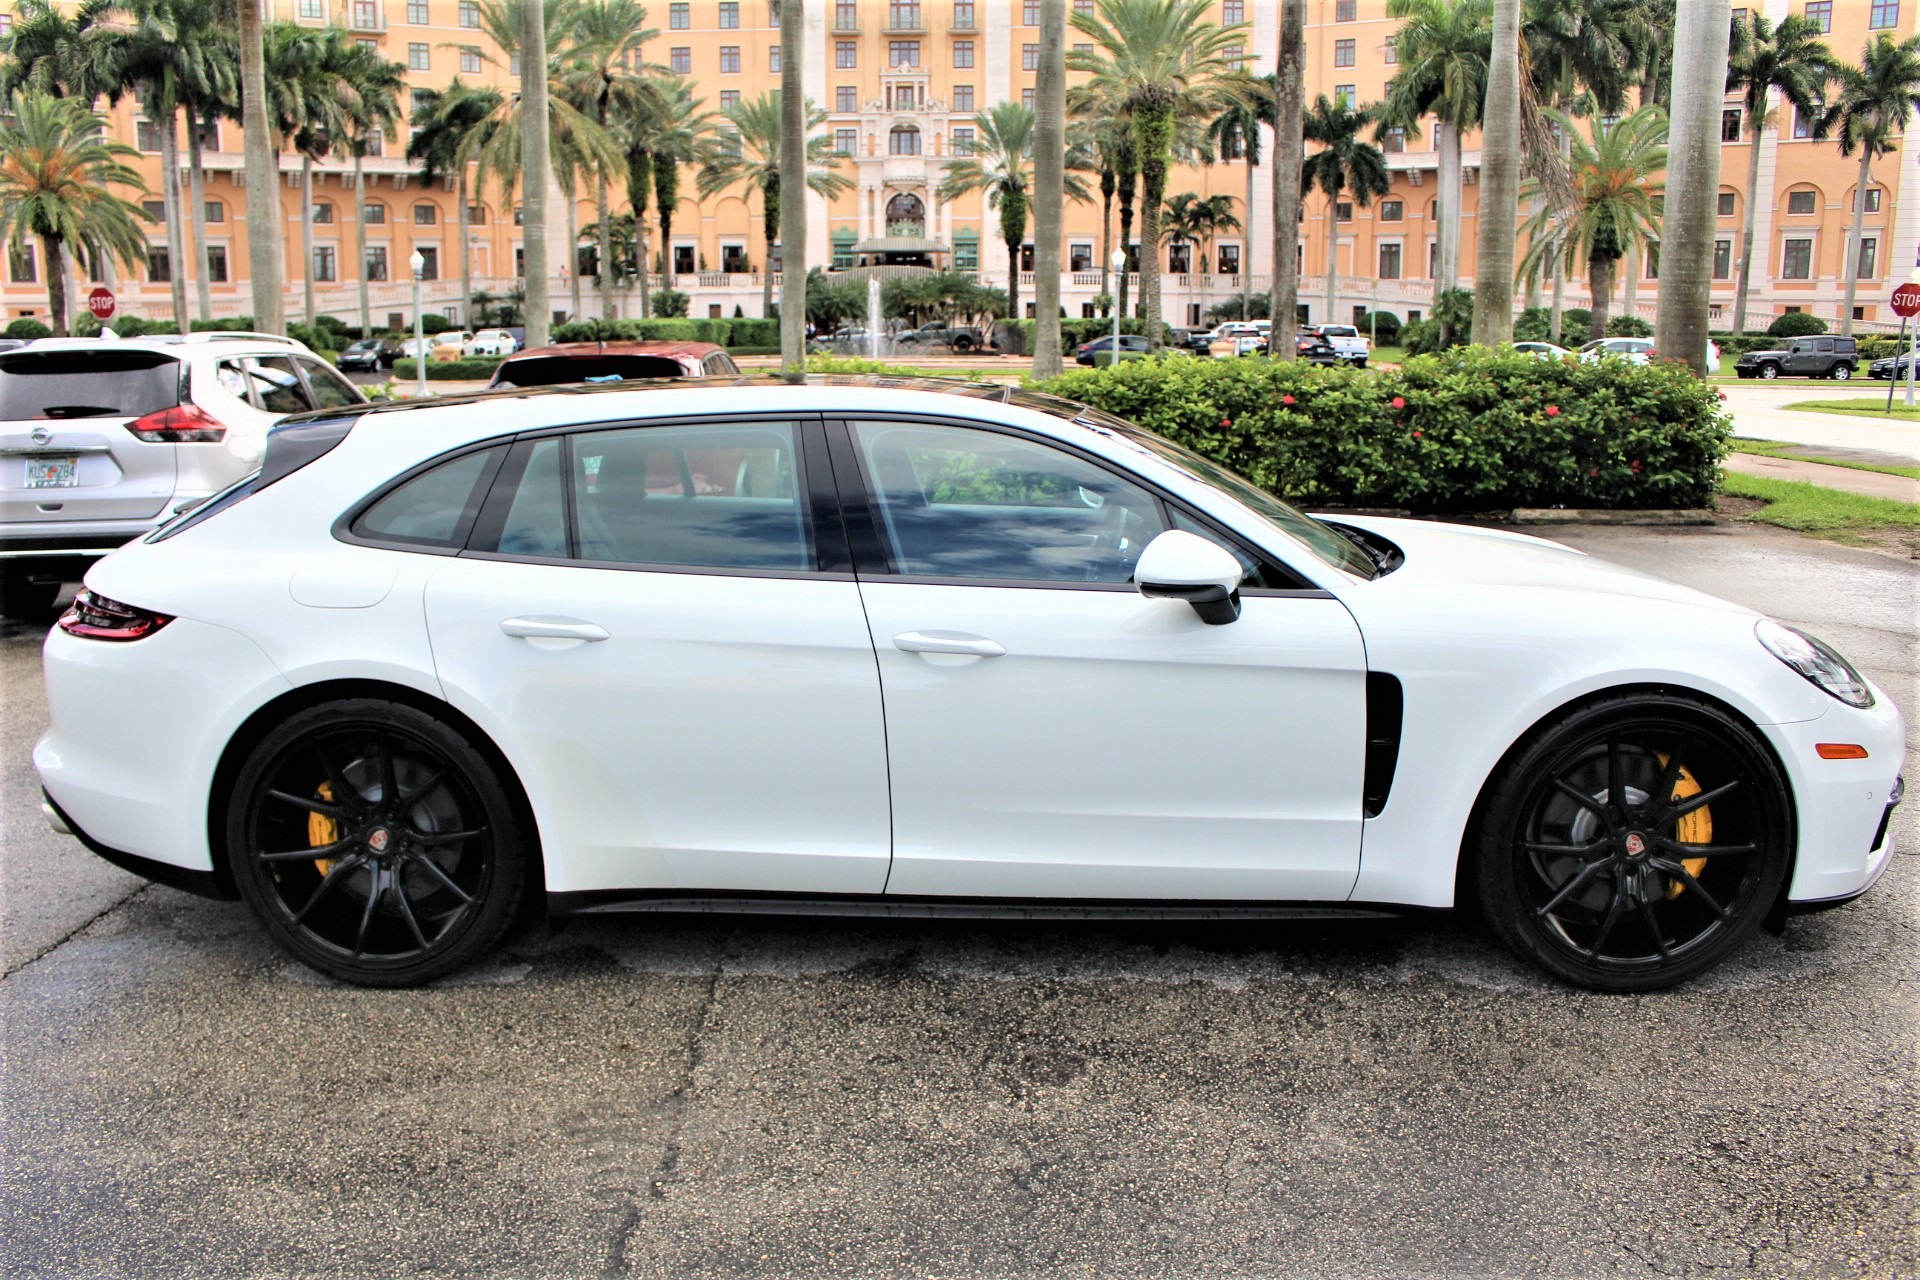 Used 2018 Porsche Panamera 4 Sport Turismo for sale Sold at The Gables Sports Cars in Miami FL 33146 4